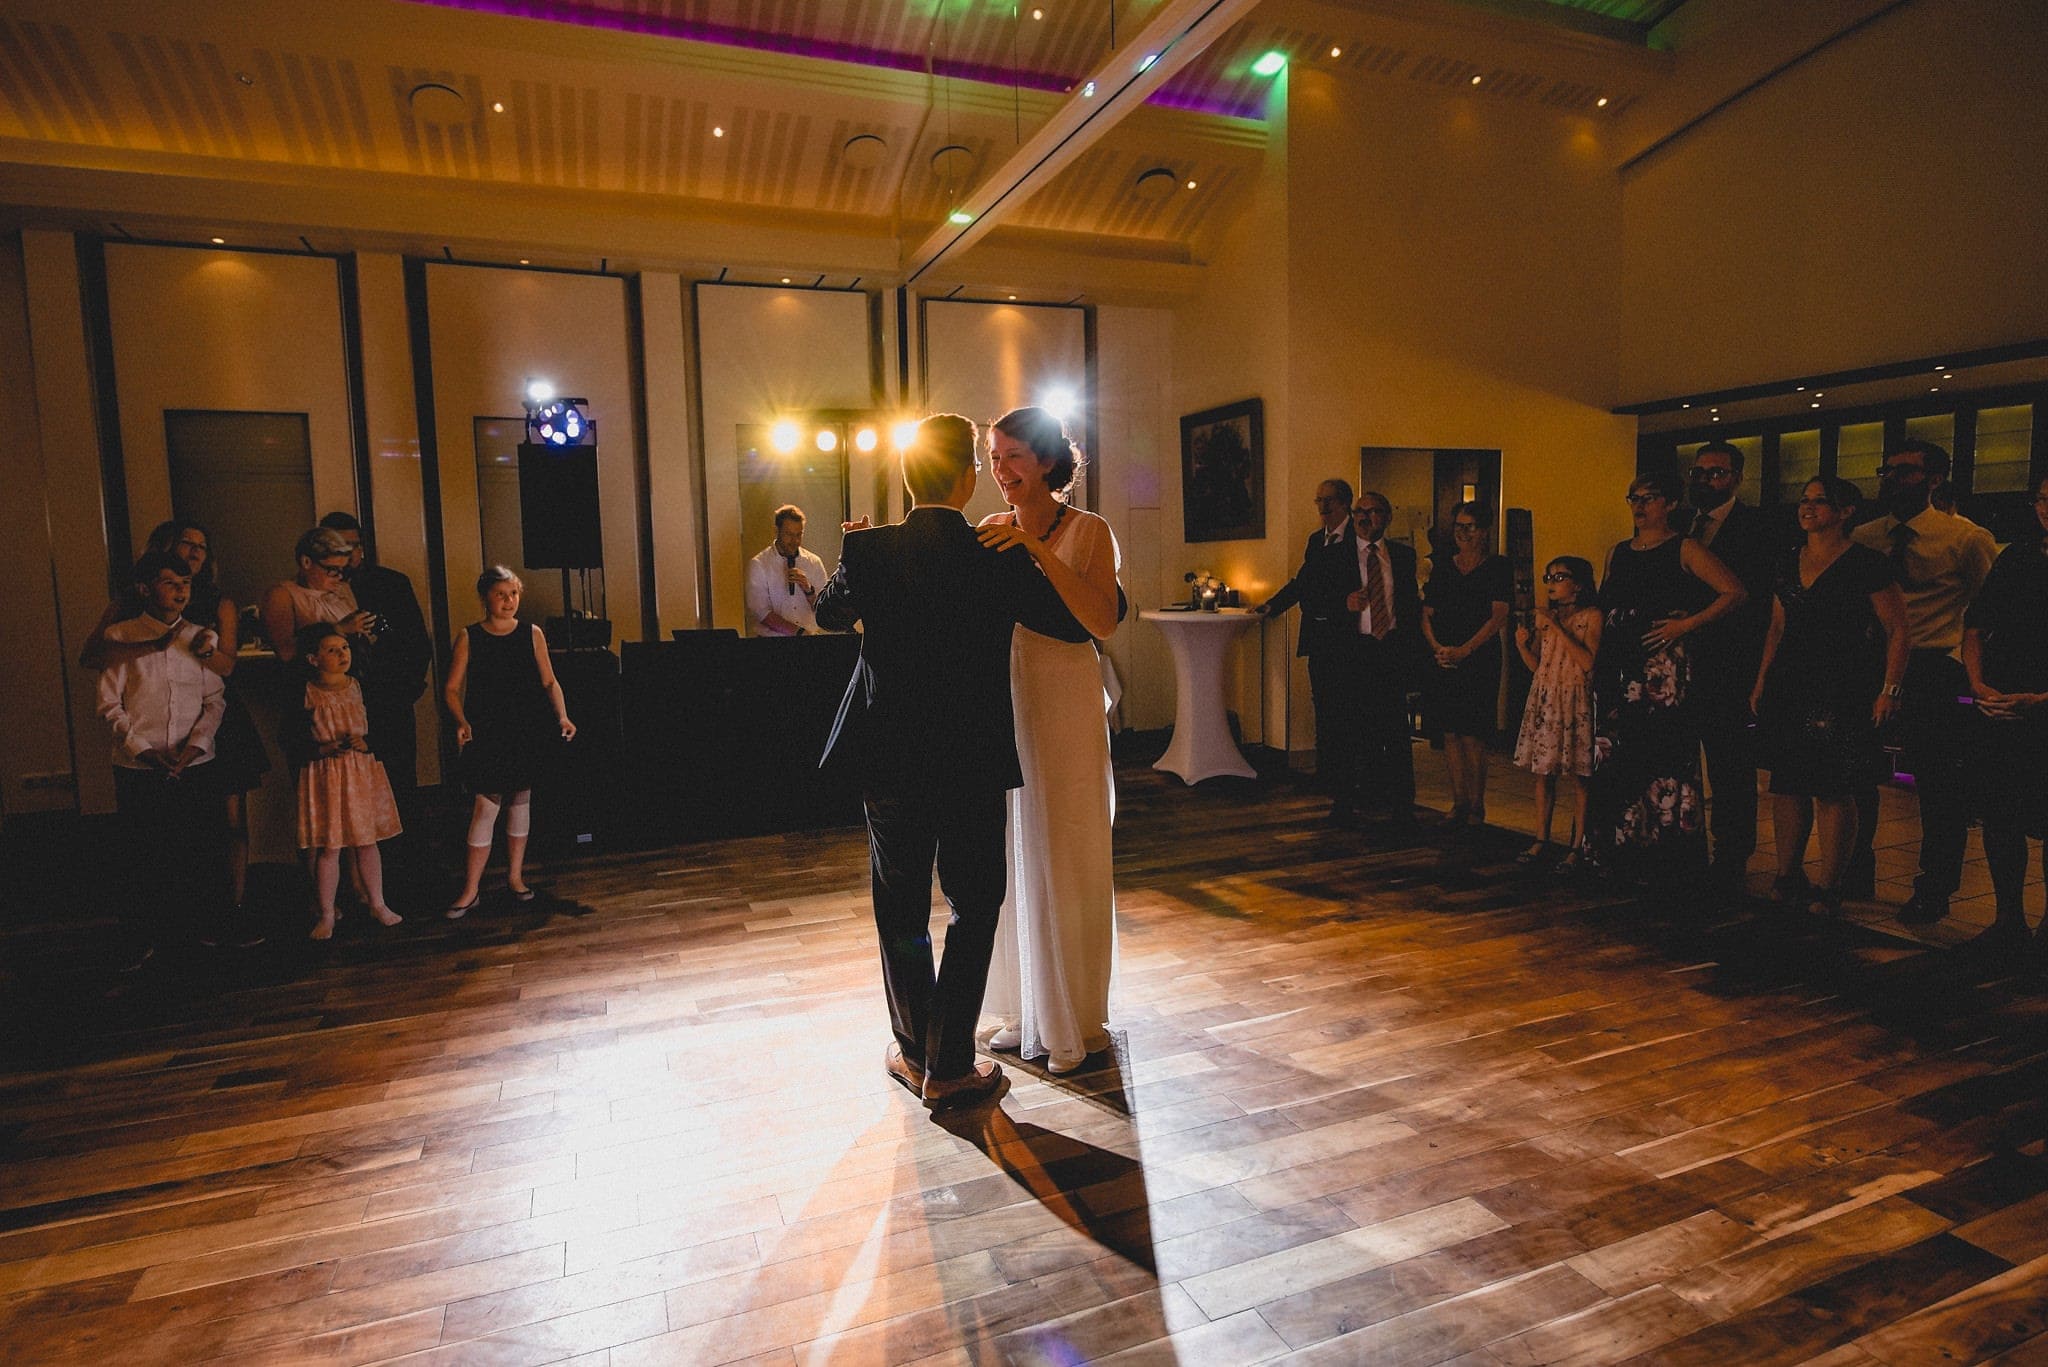 Bride and groom's First dance at their Heartfelt Destination Wedding in Germany | Maria Assia Photography